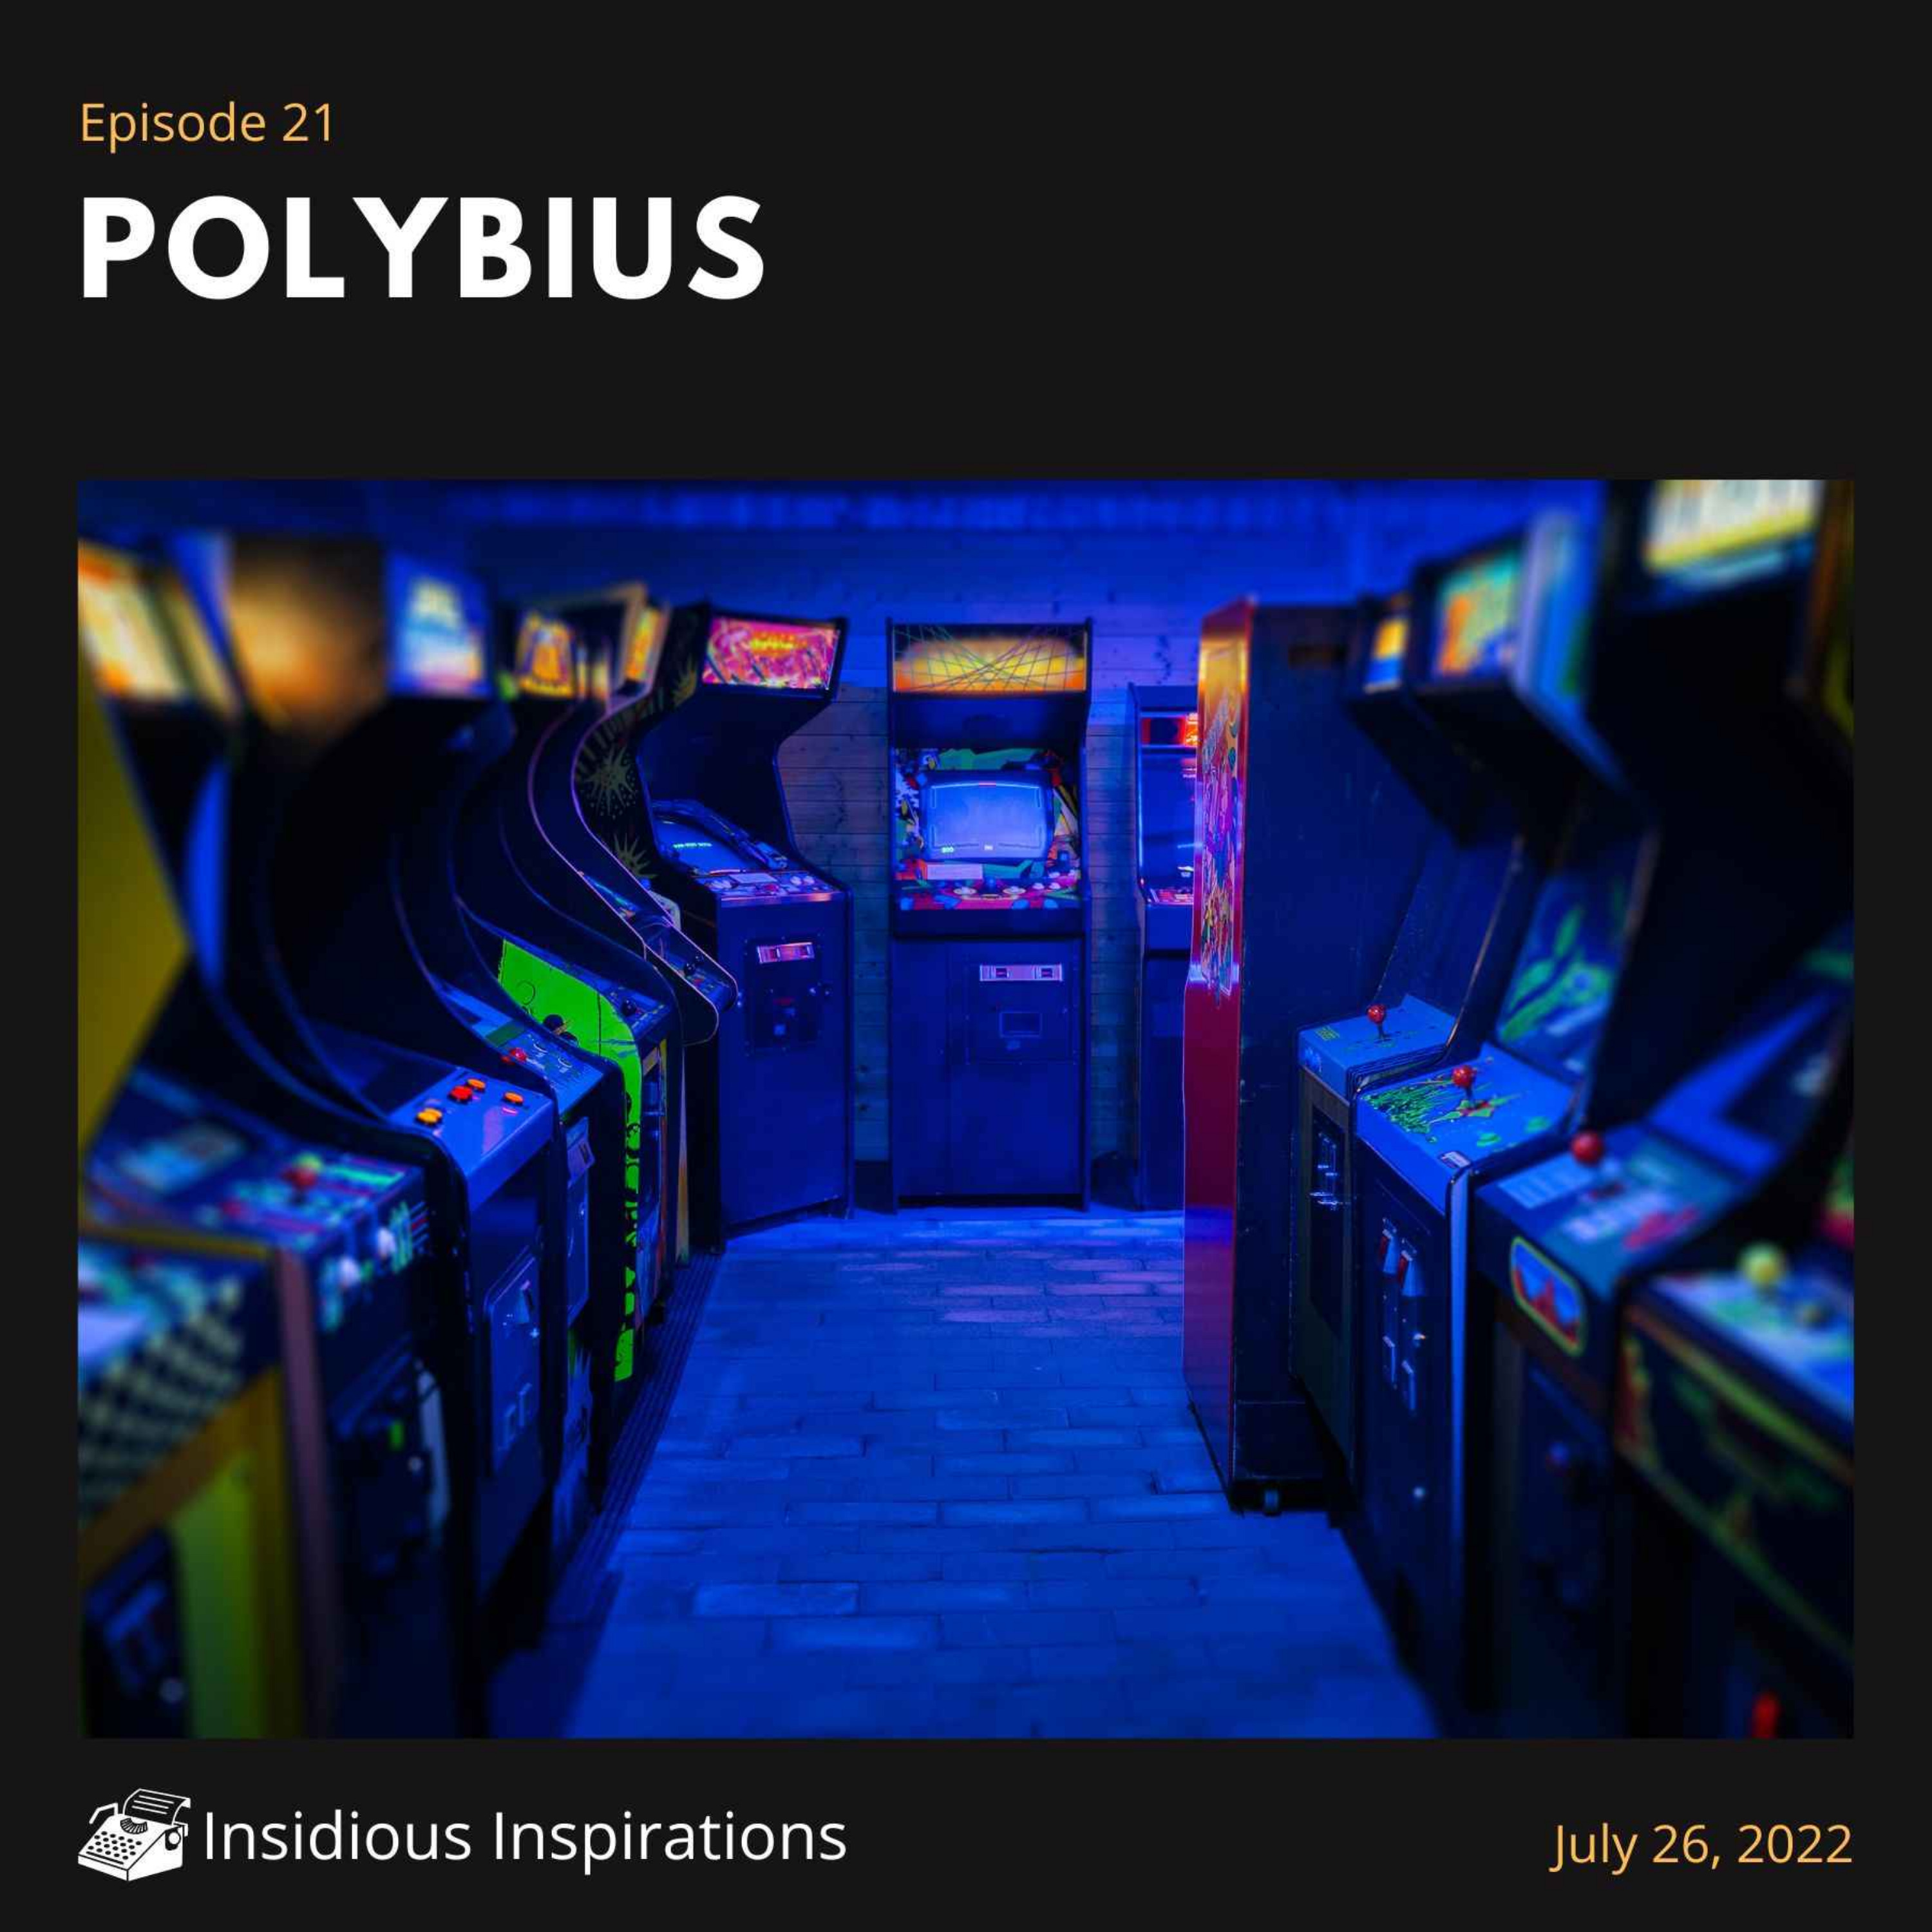 Polybius - Death by Video Games